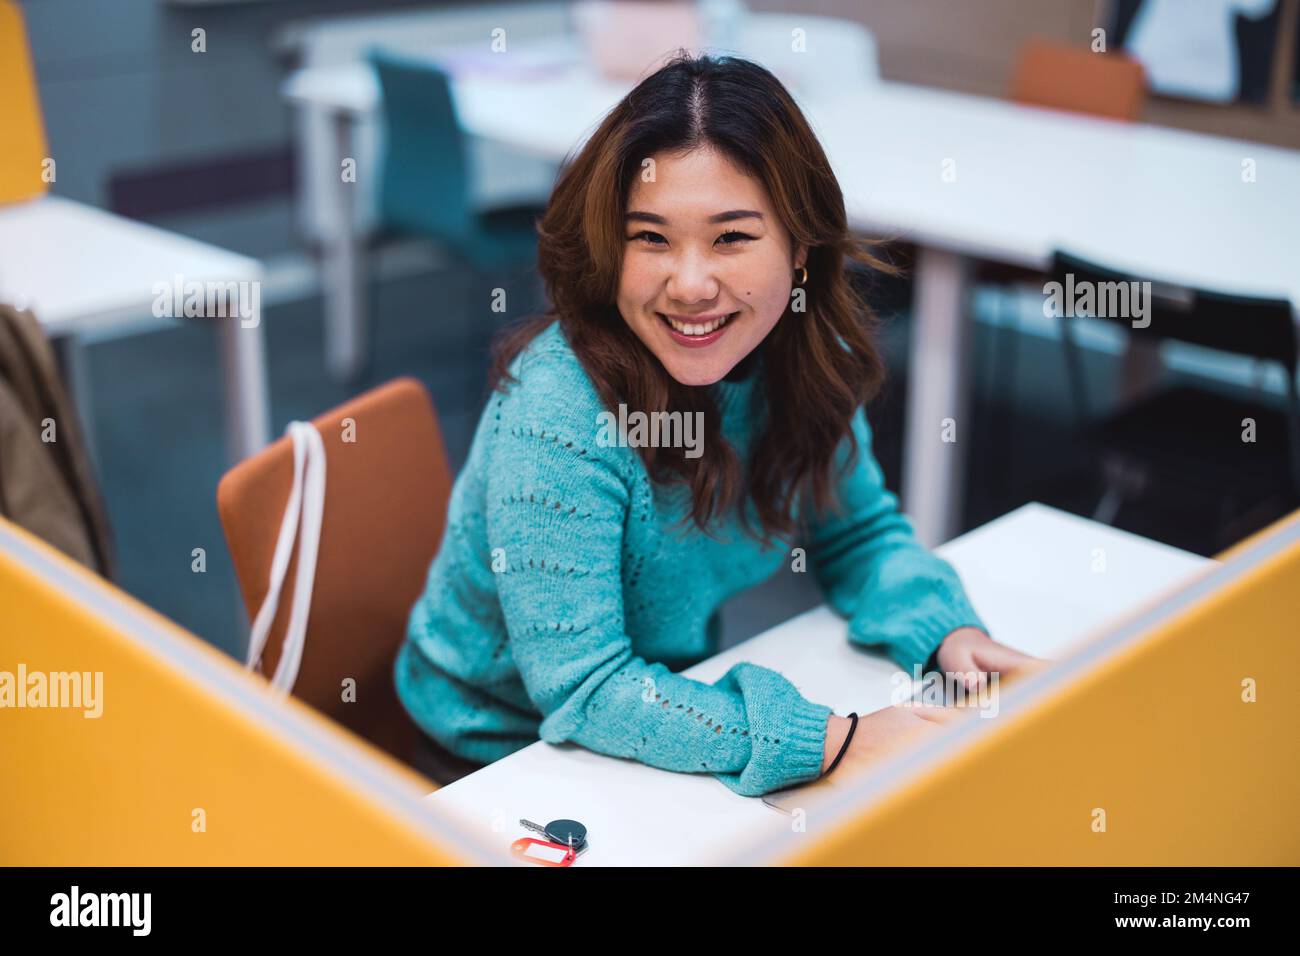 Female student working on laptop in a library cubicle Stock Photo